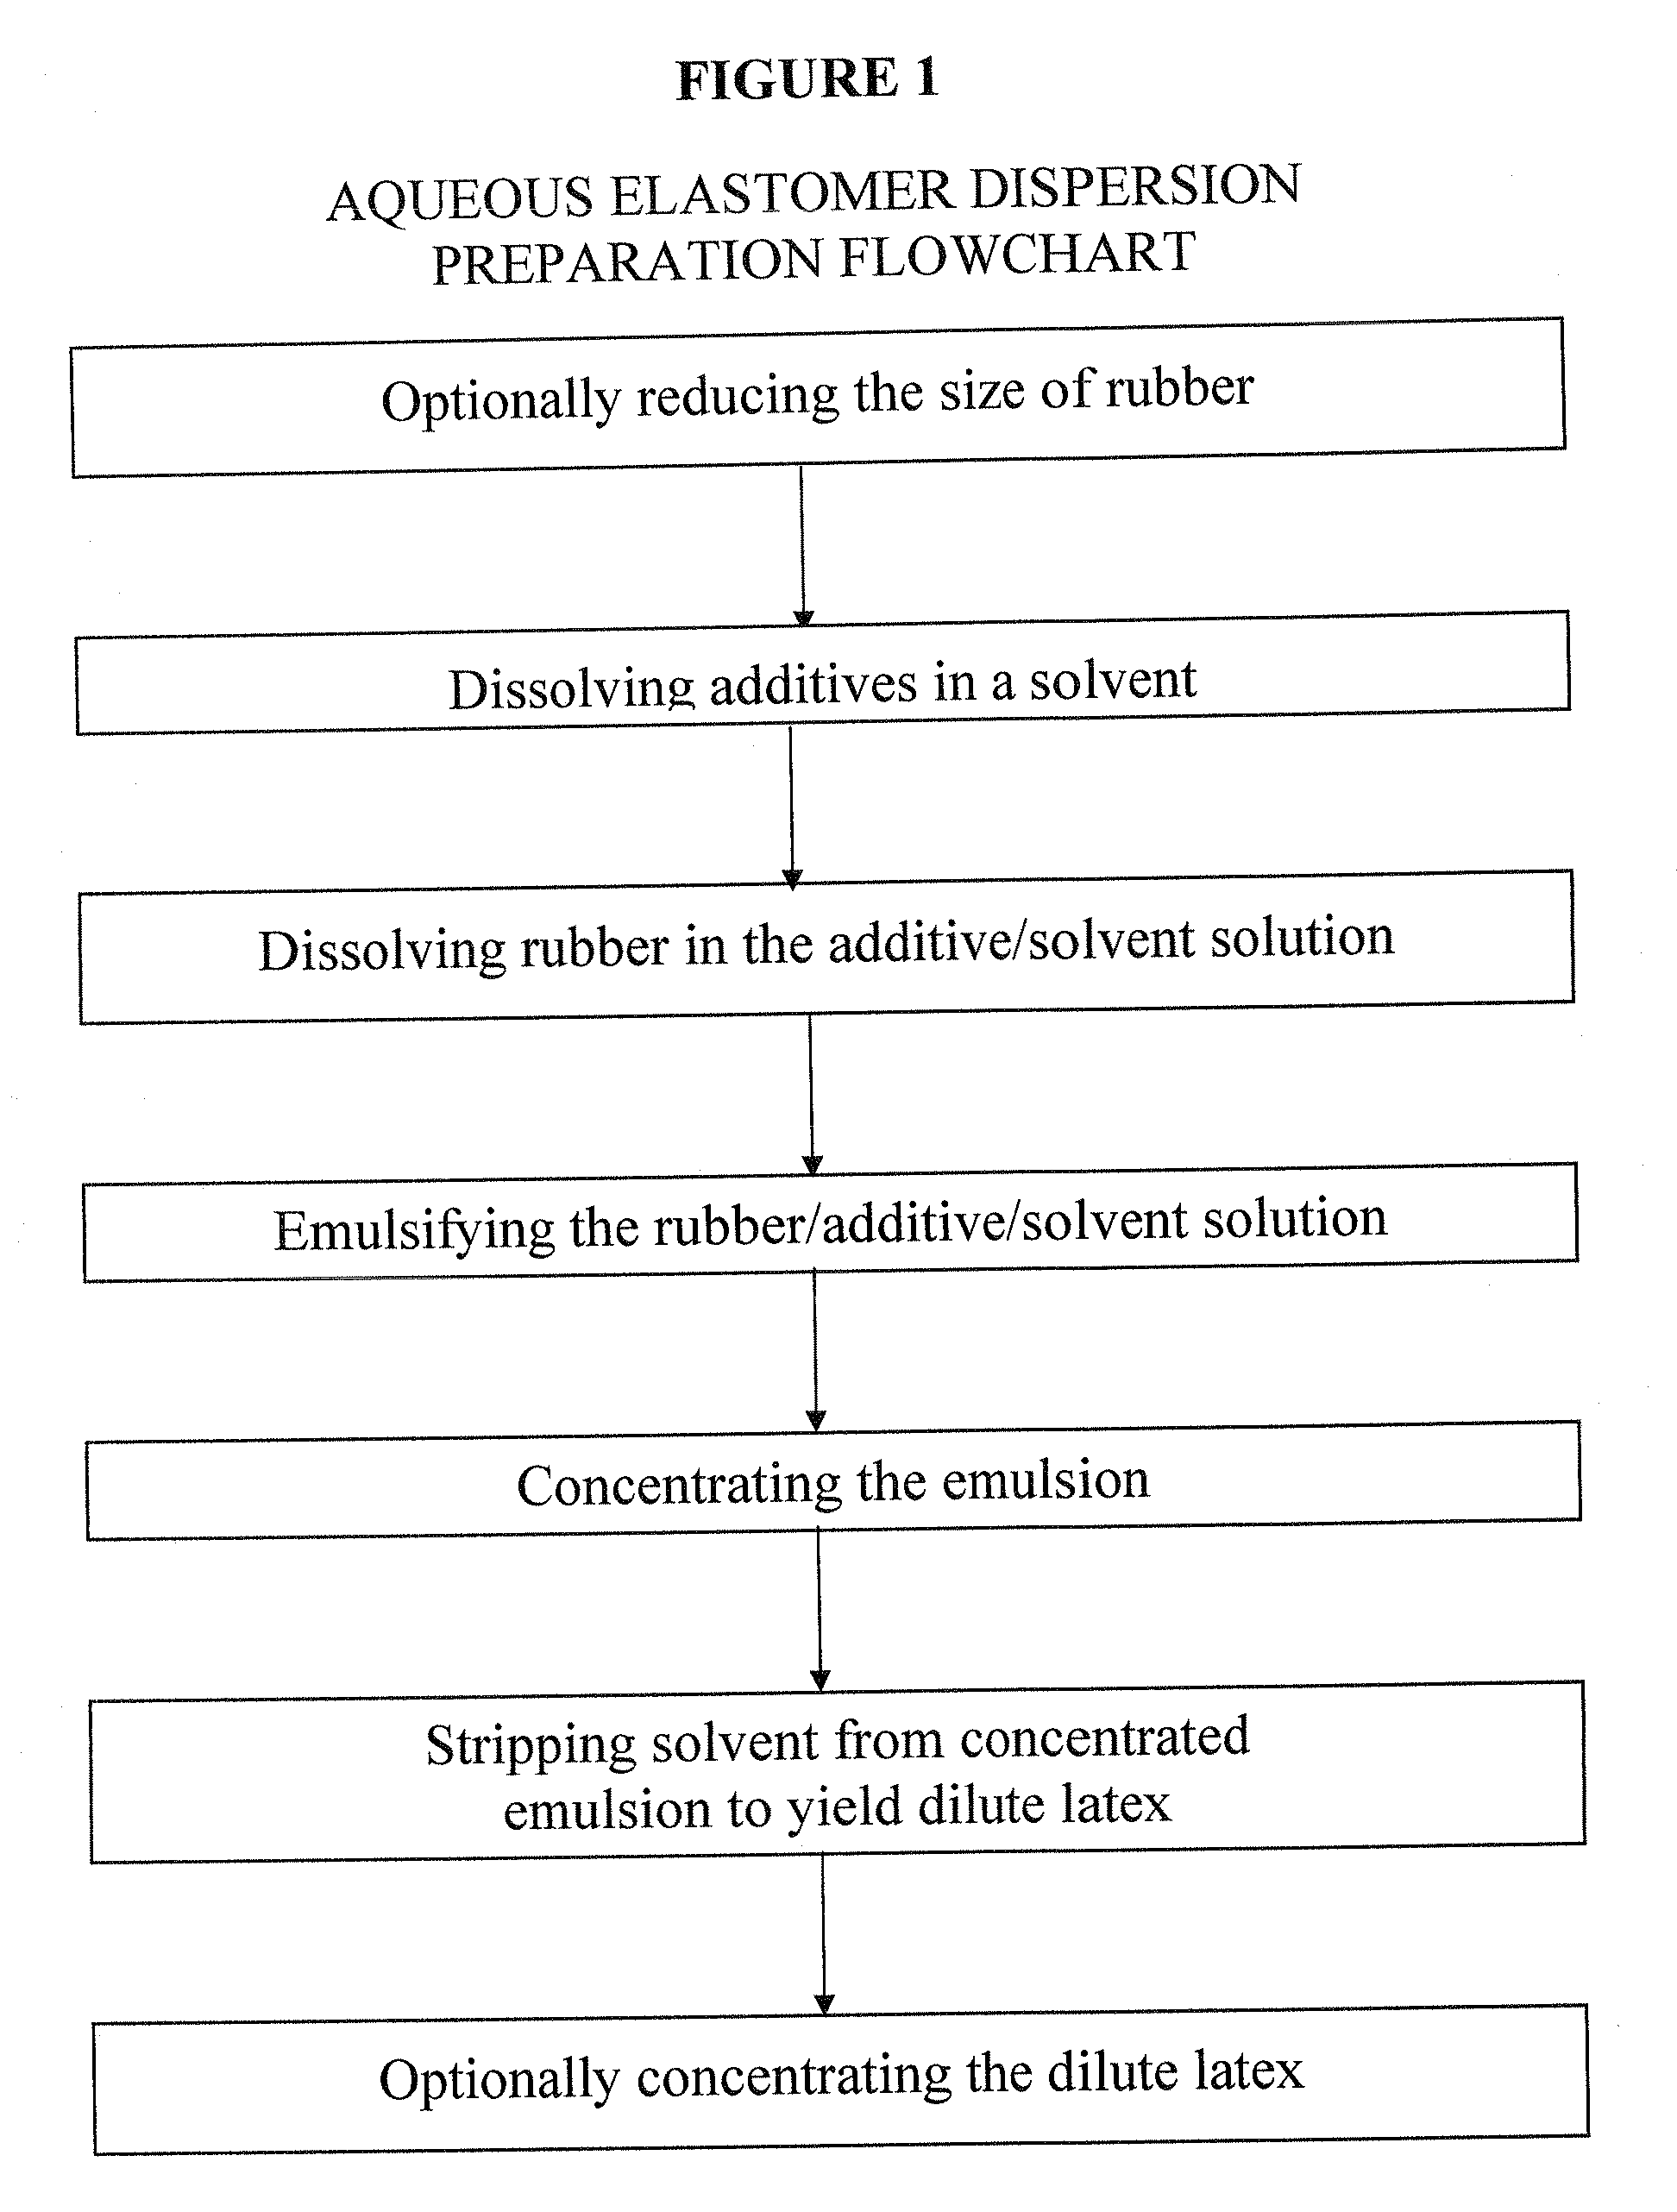 Water-based resin composition and articles made therefrom